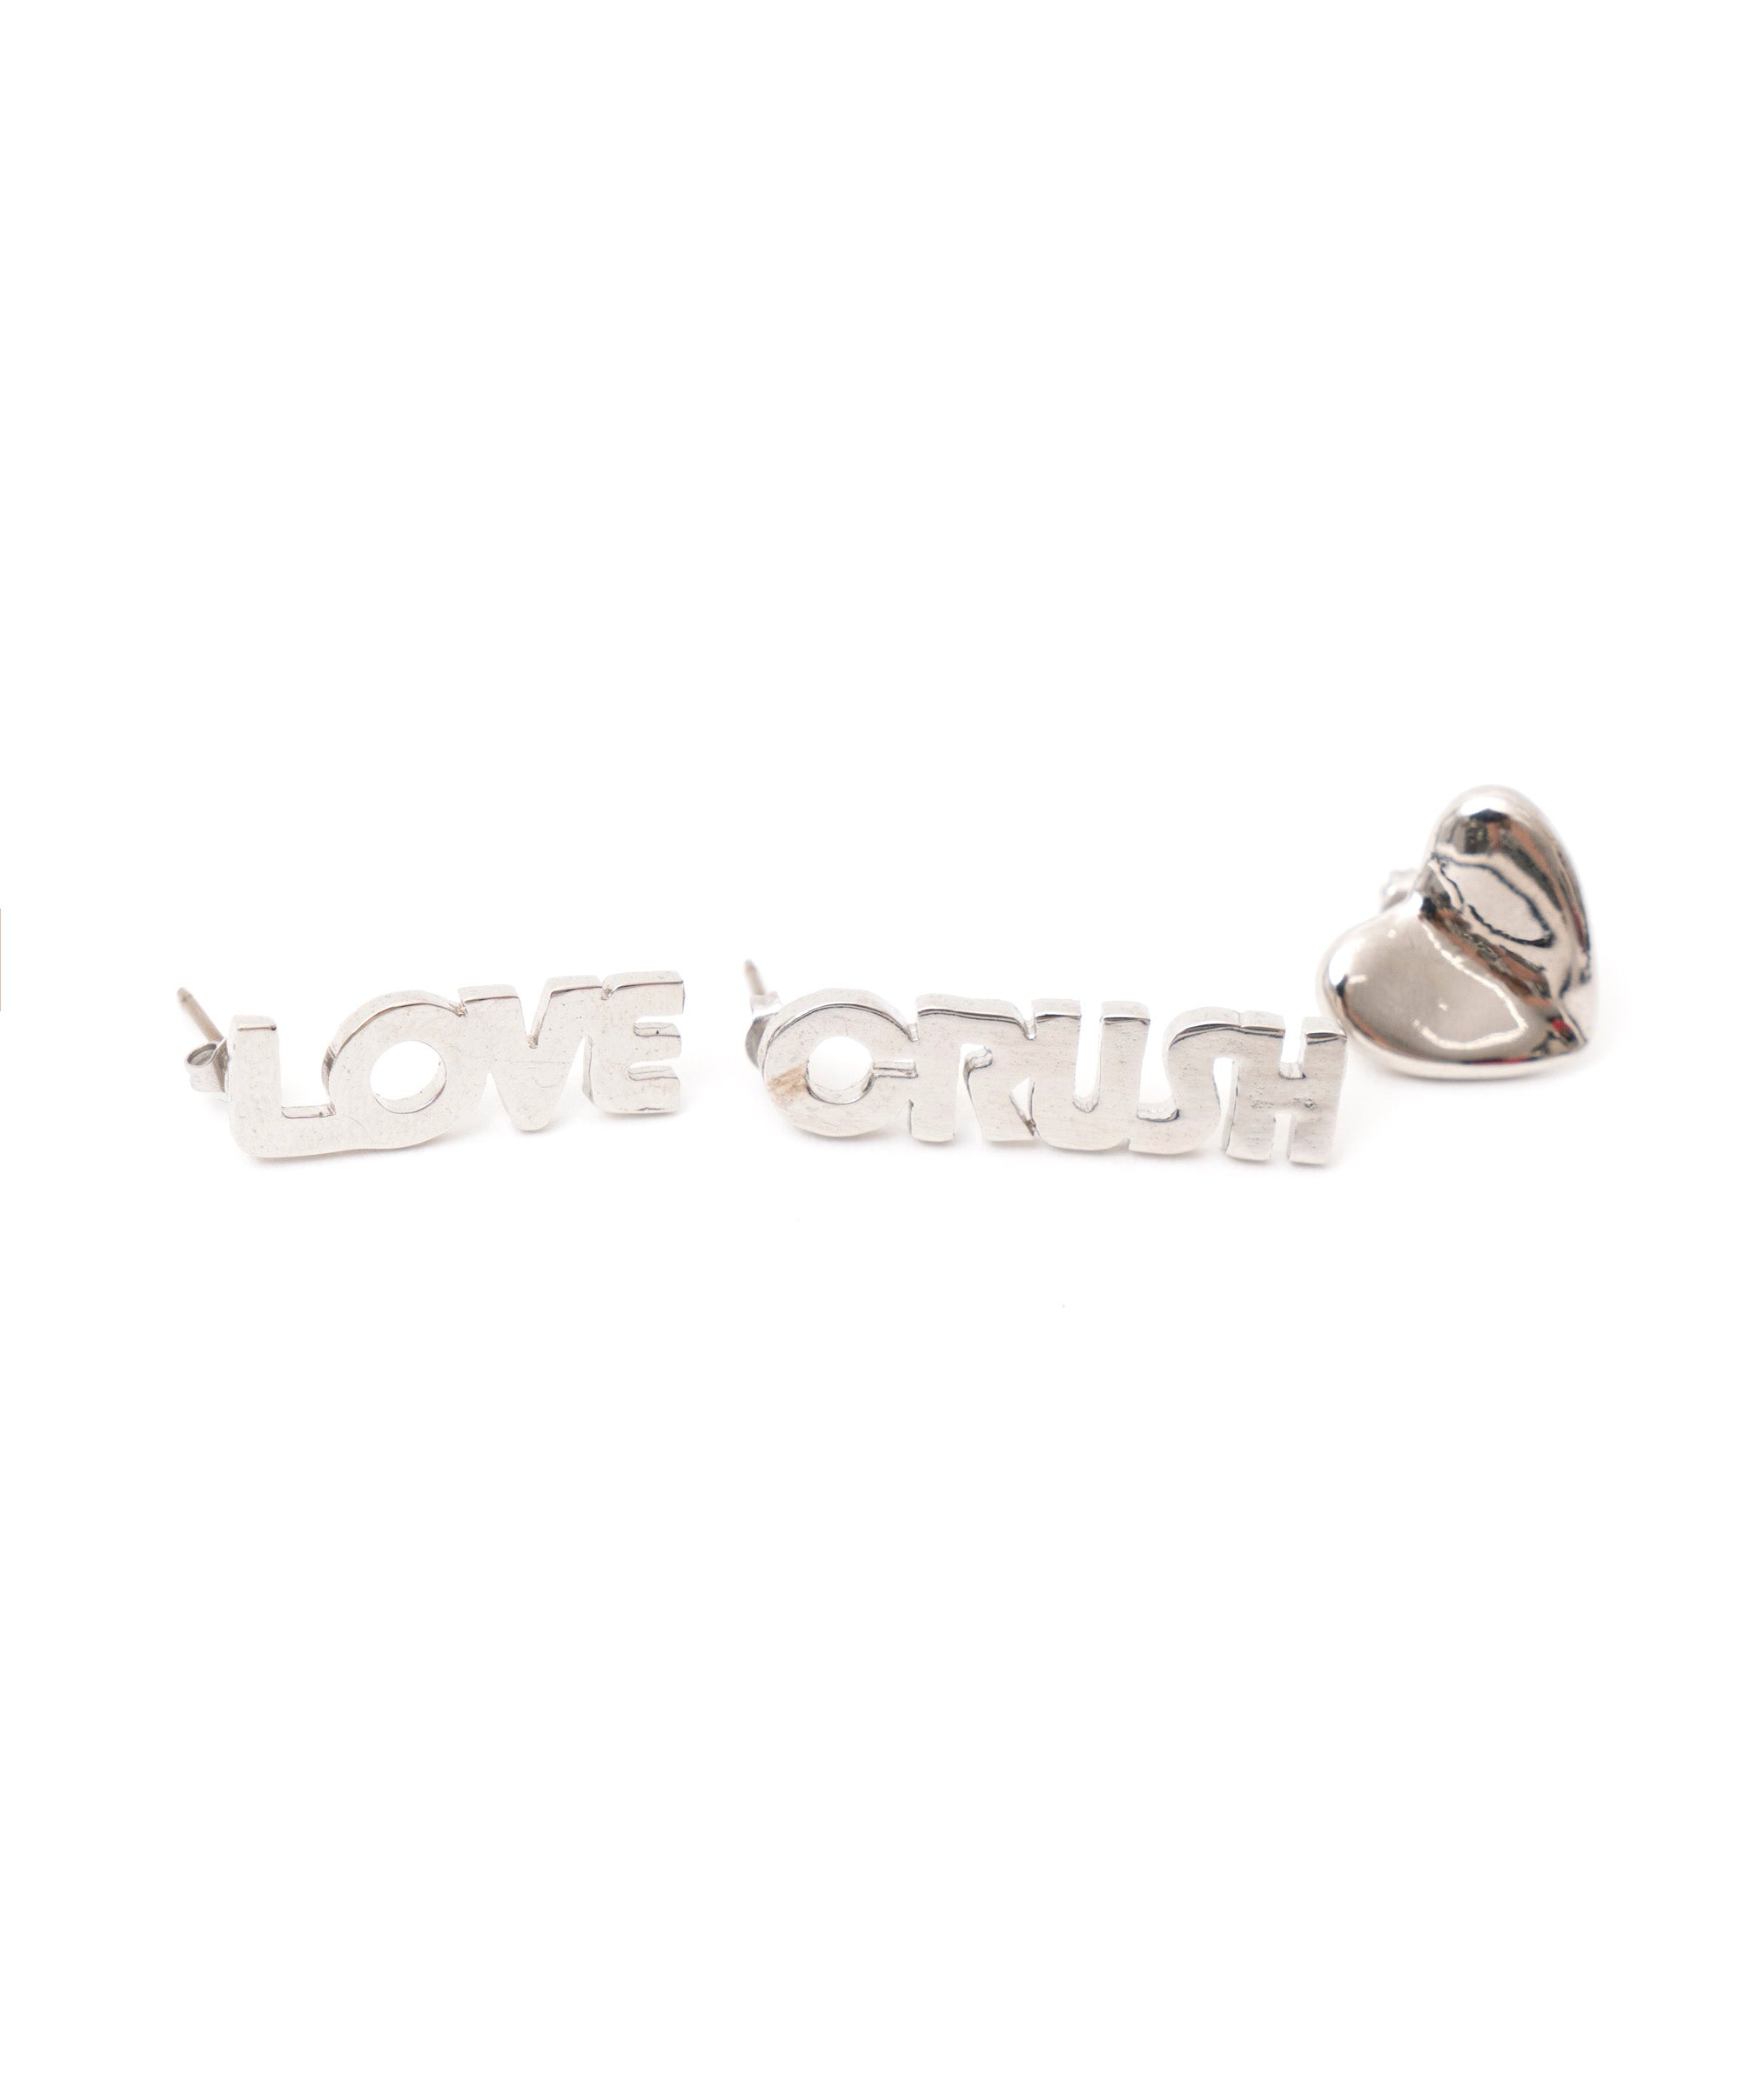 LOVE CRUSH Necklace